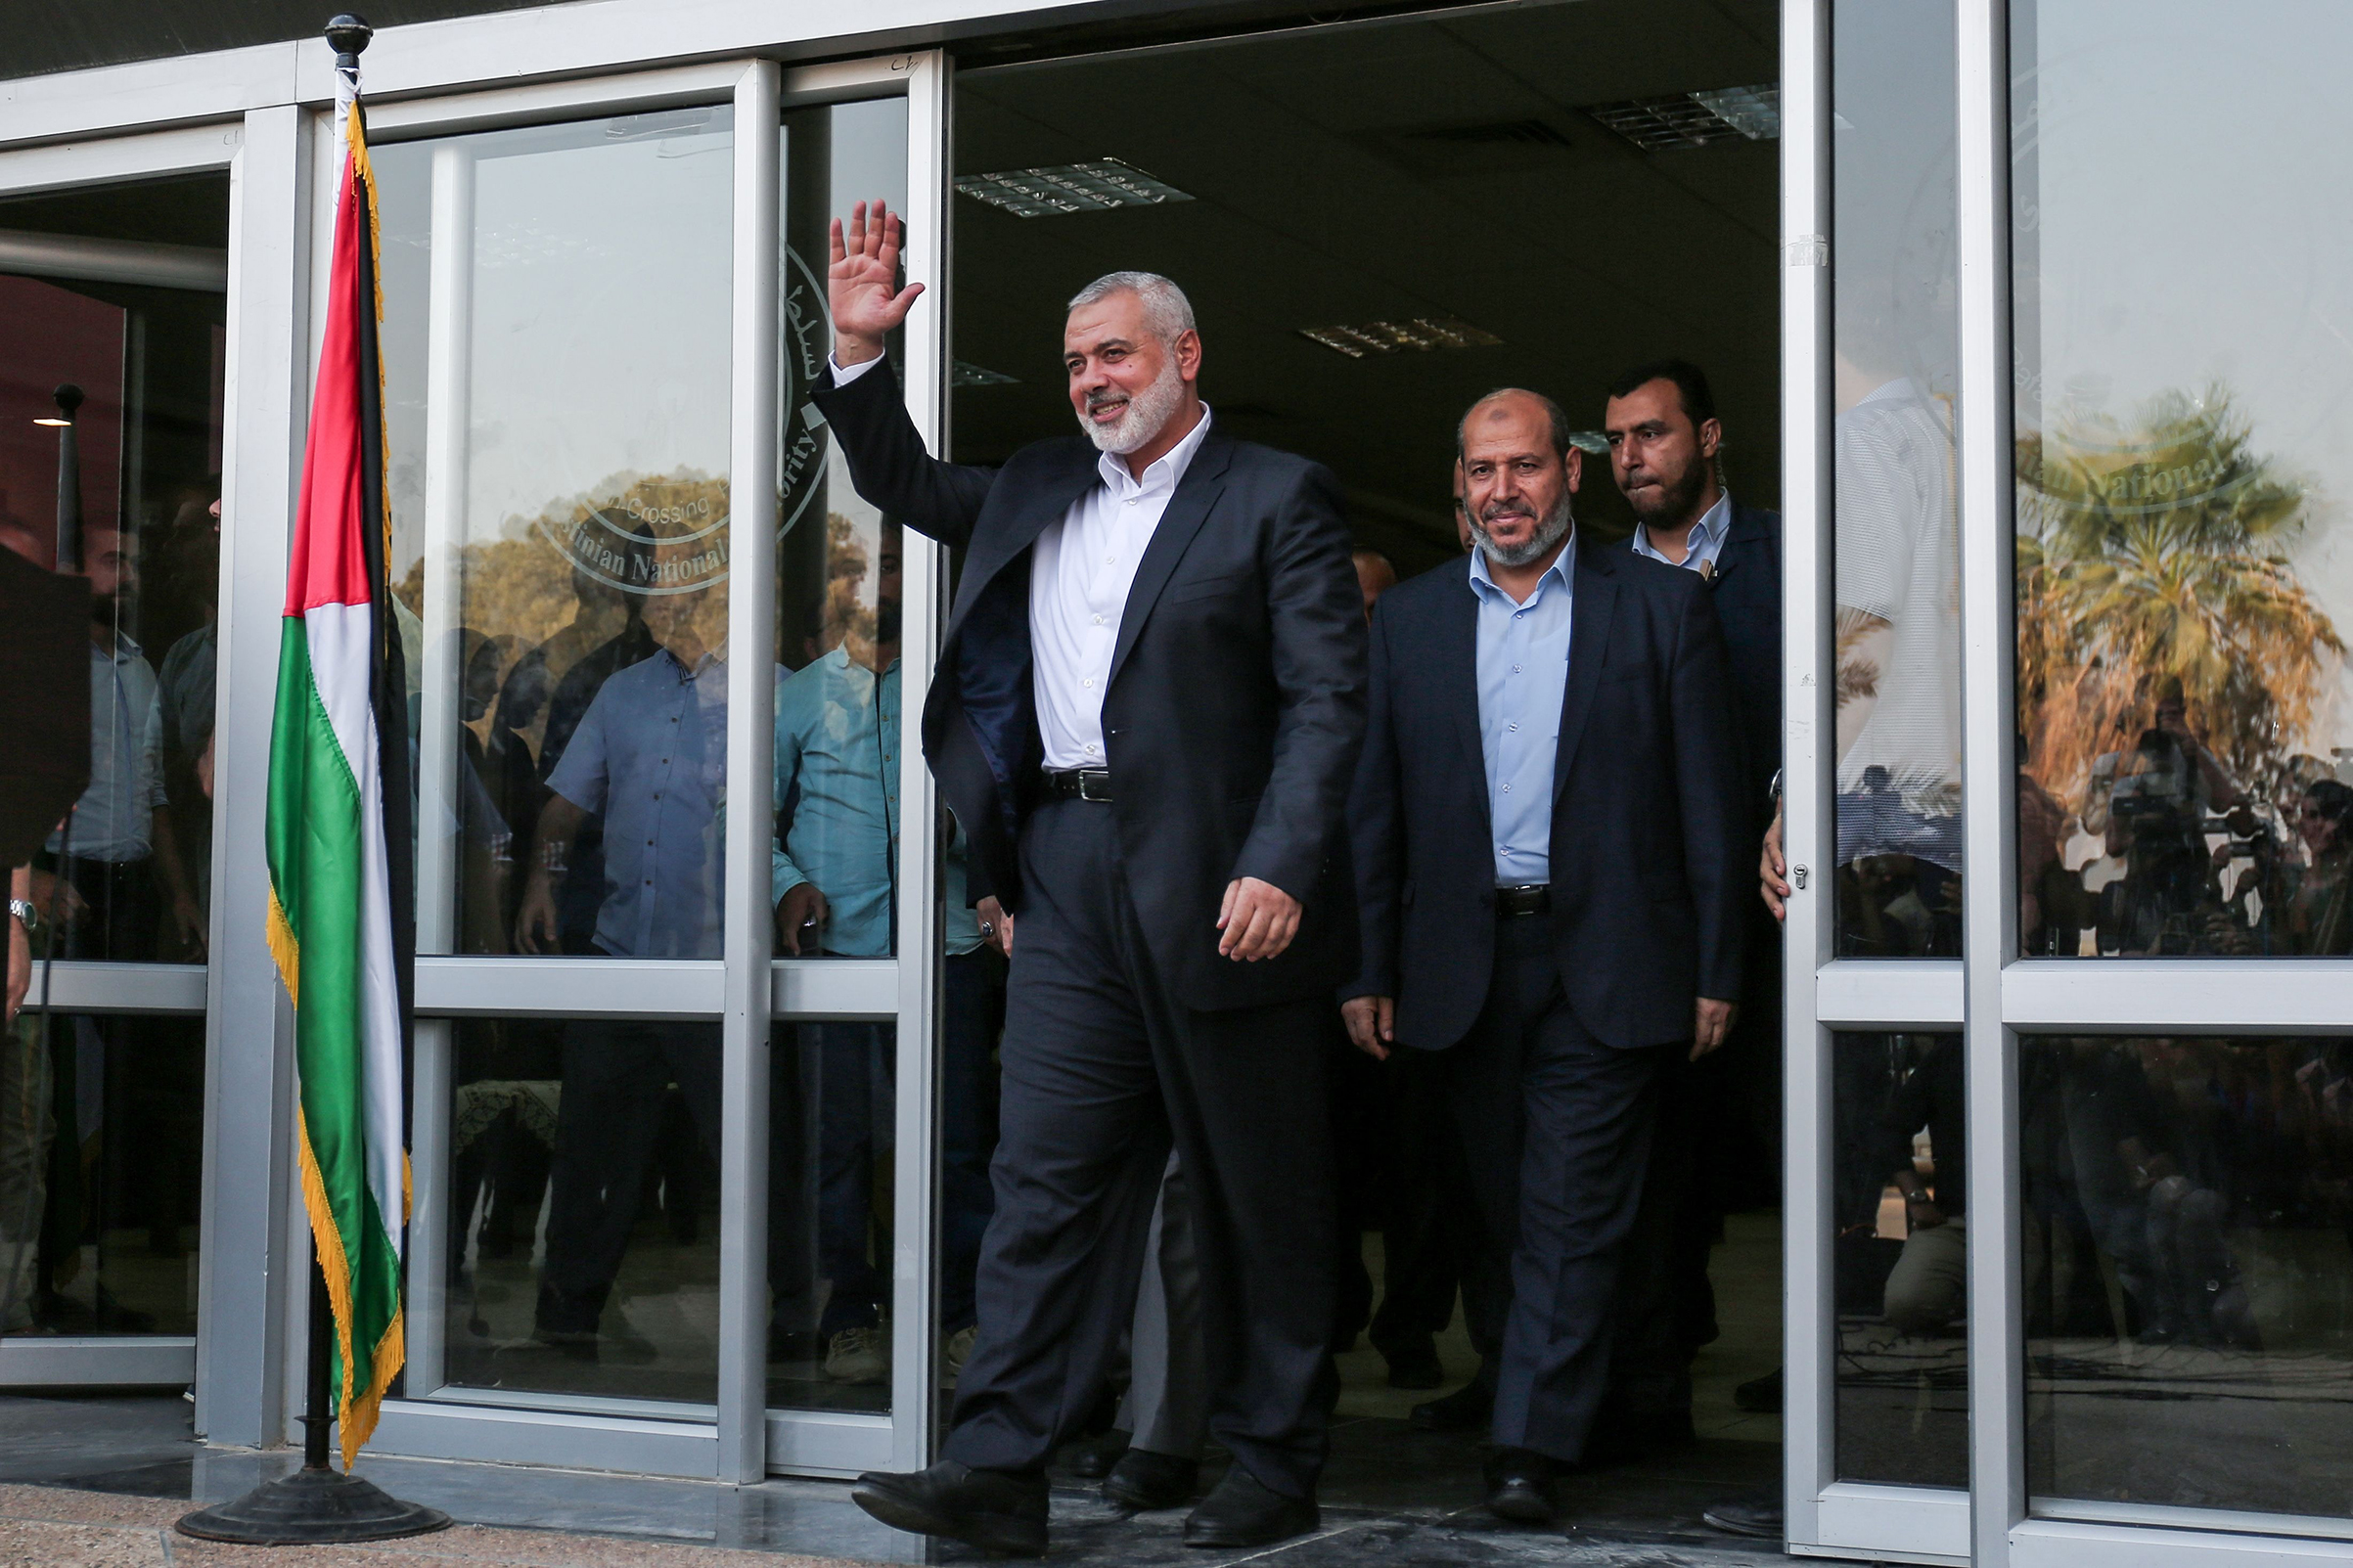 Hamas elected Ismail Haniyeh leader in May. (Said Khatib—AFP/Getty Images)